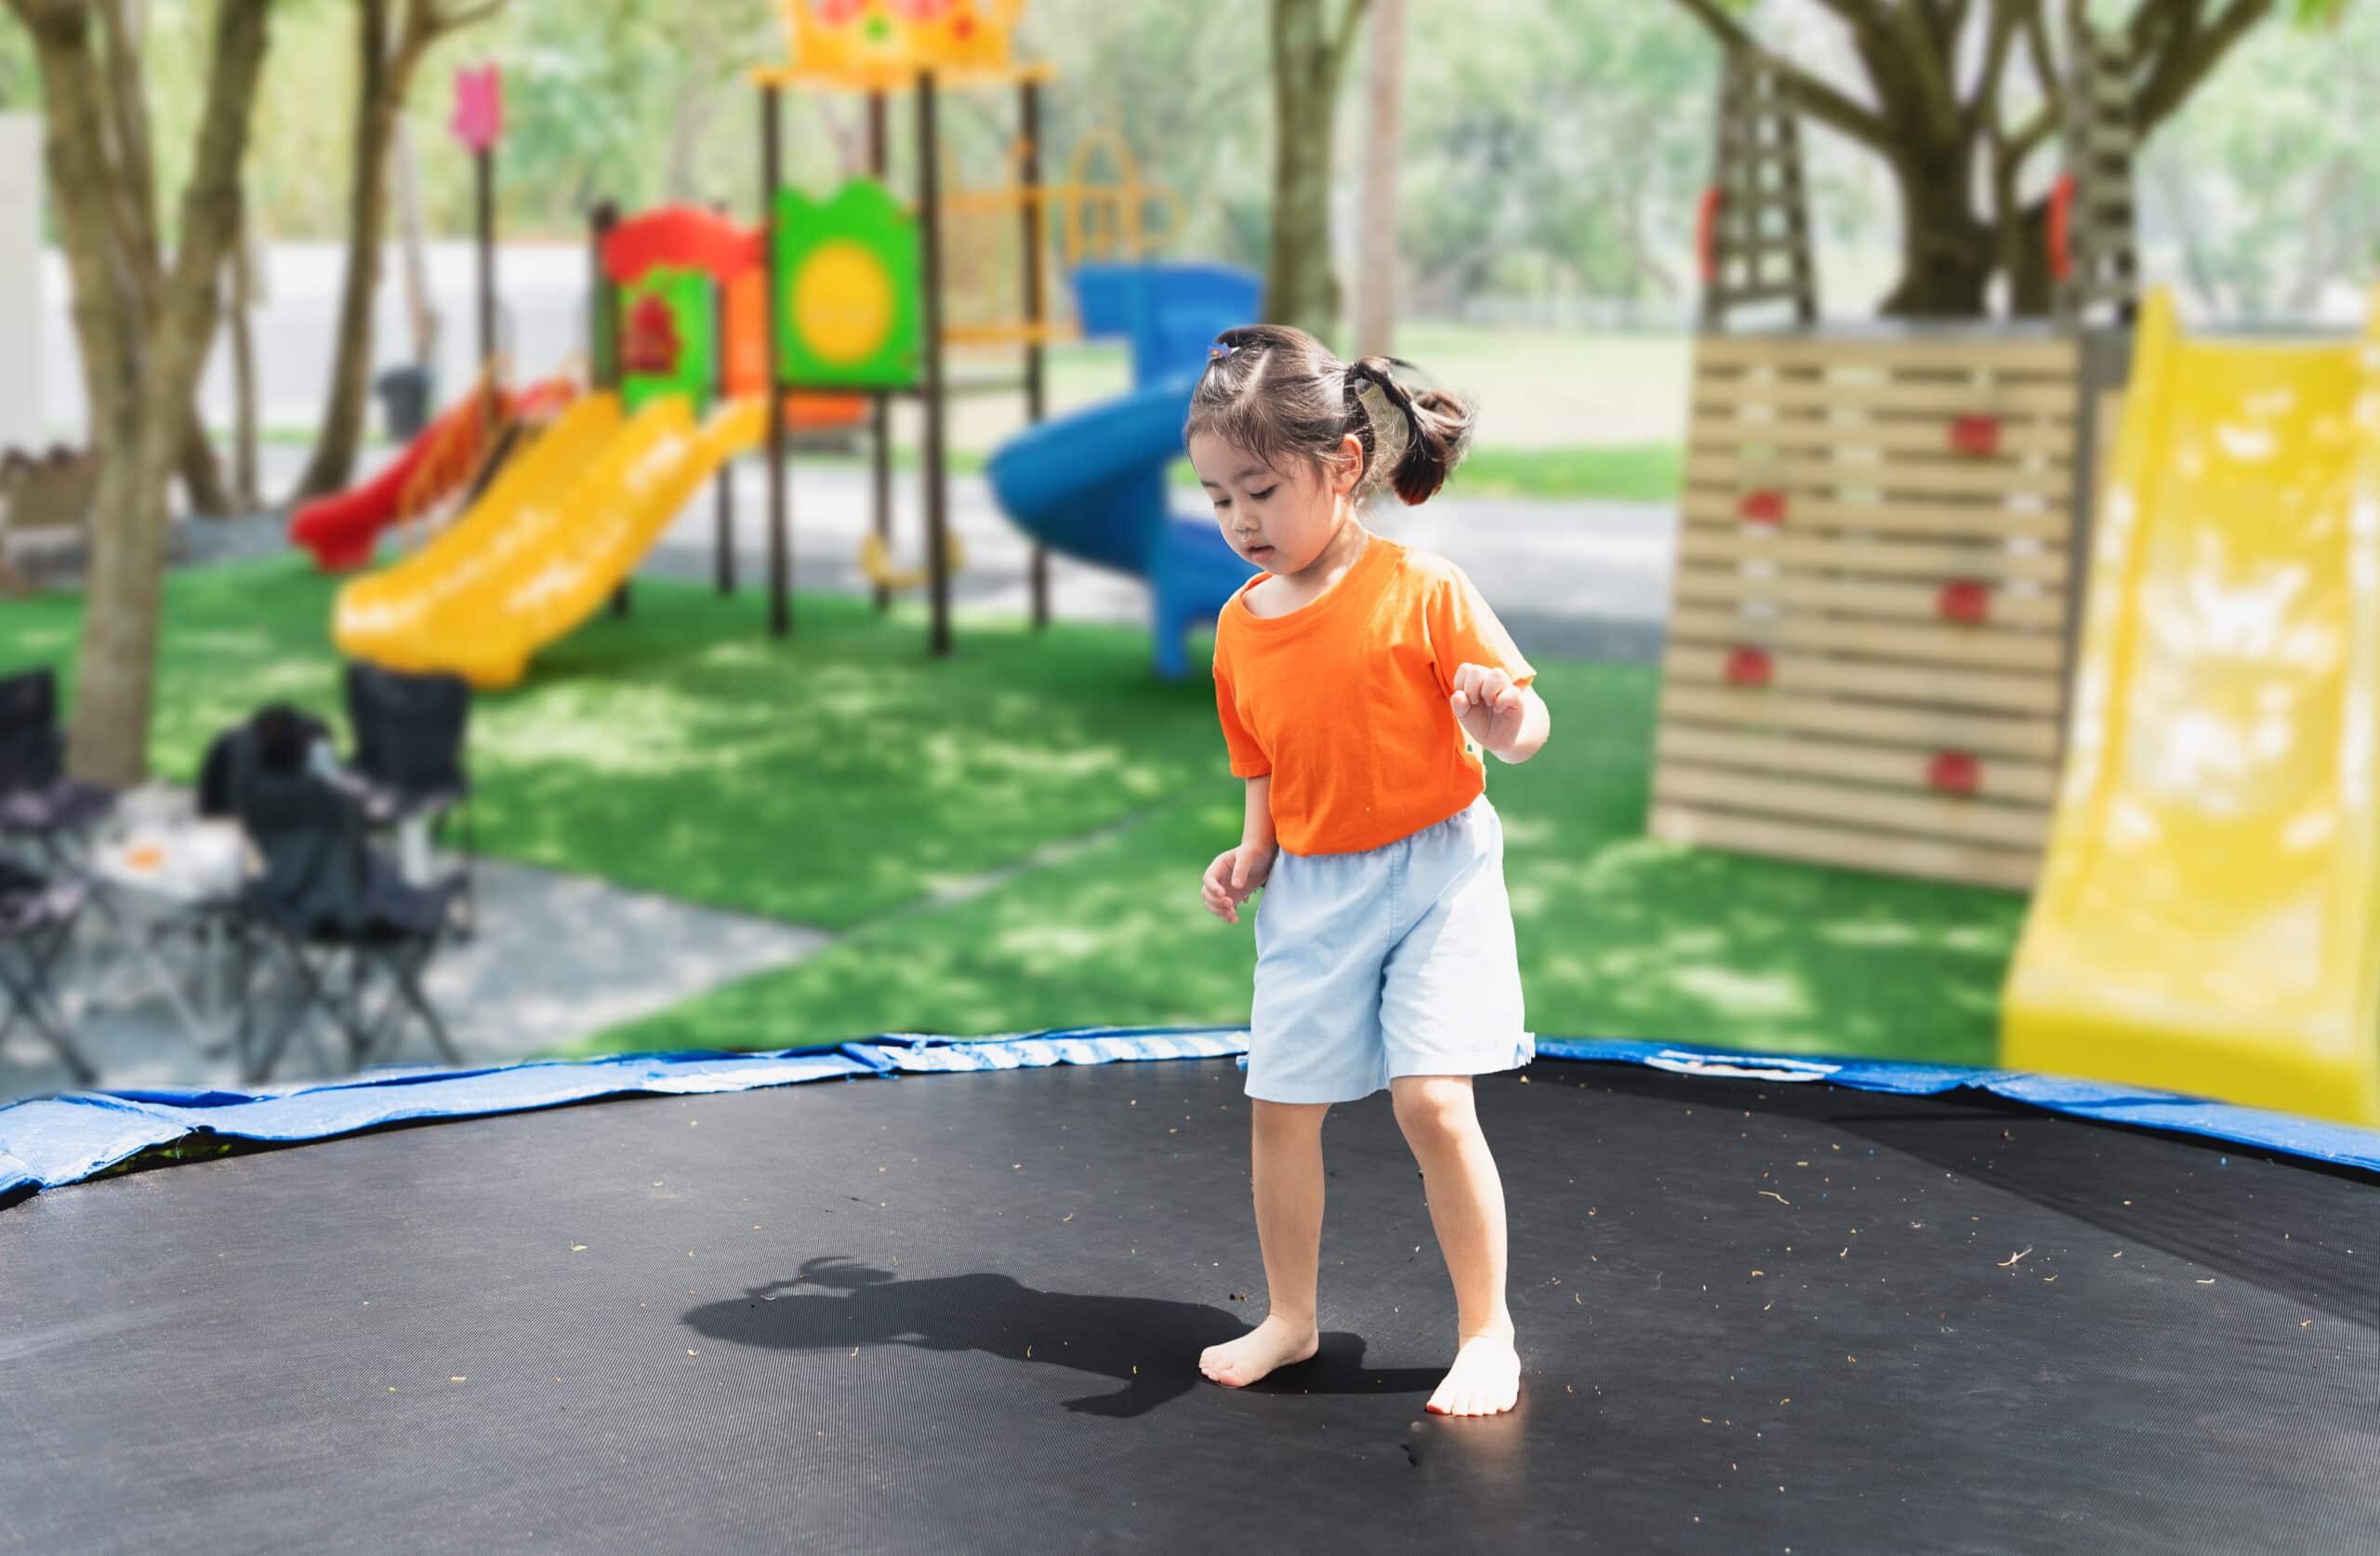 www.appr.com : How far should trampoline be from fence?